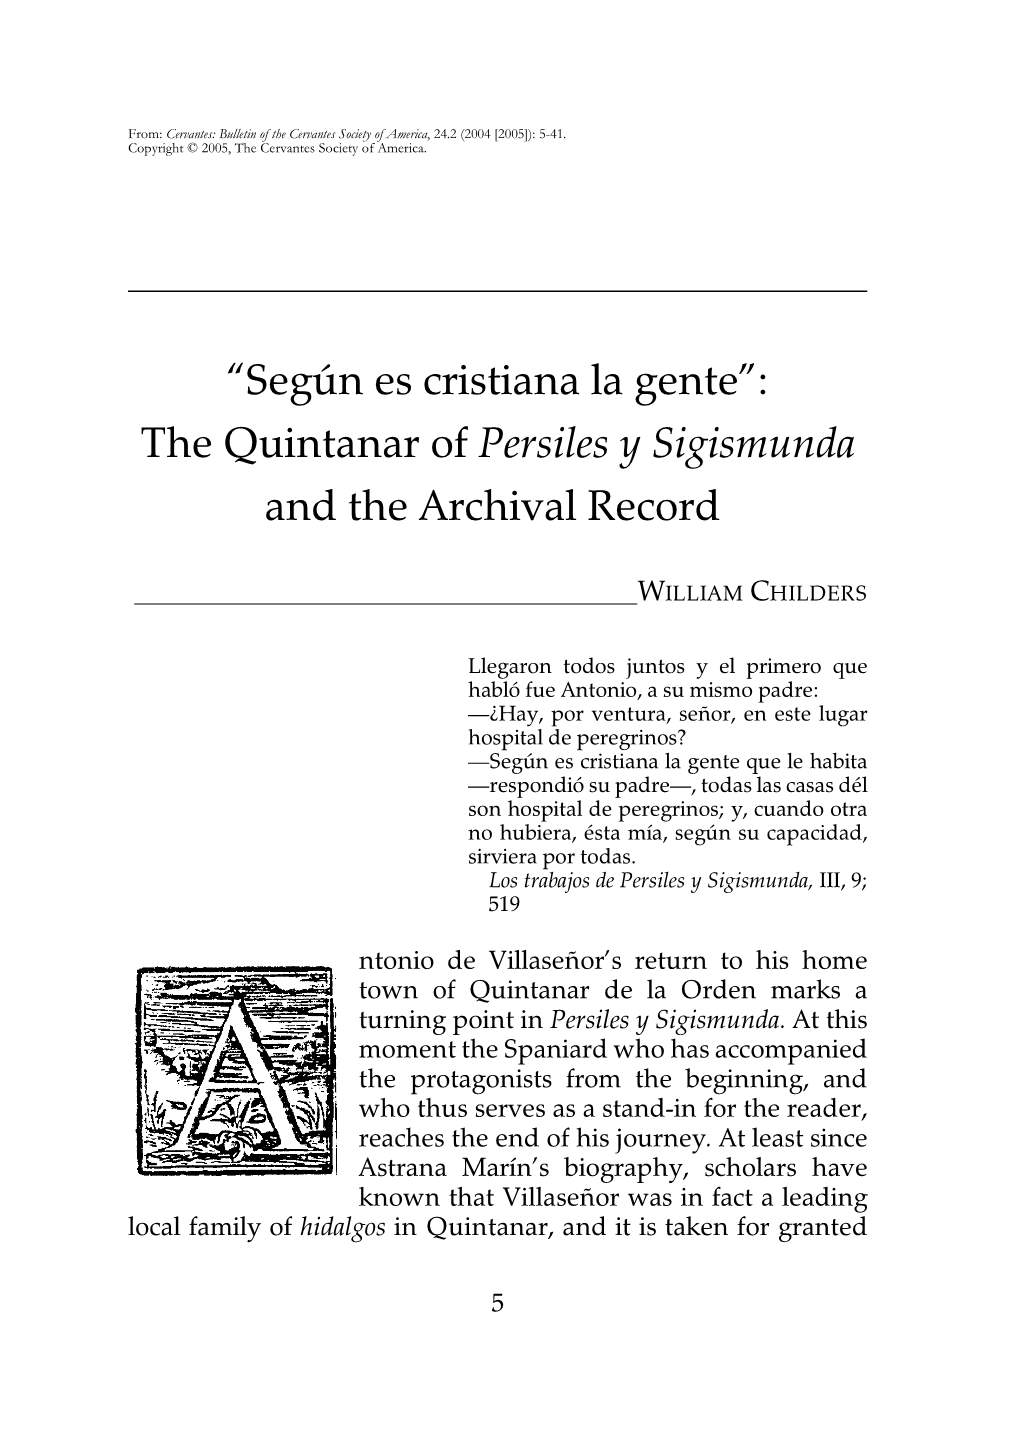 The Quintanar of "Persiles Y Sigismunda" and the Archival Record